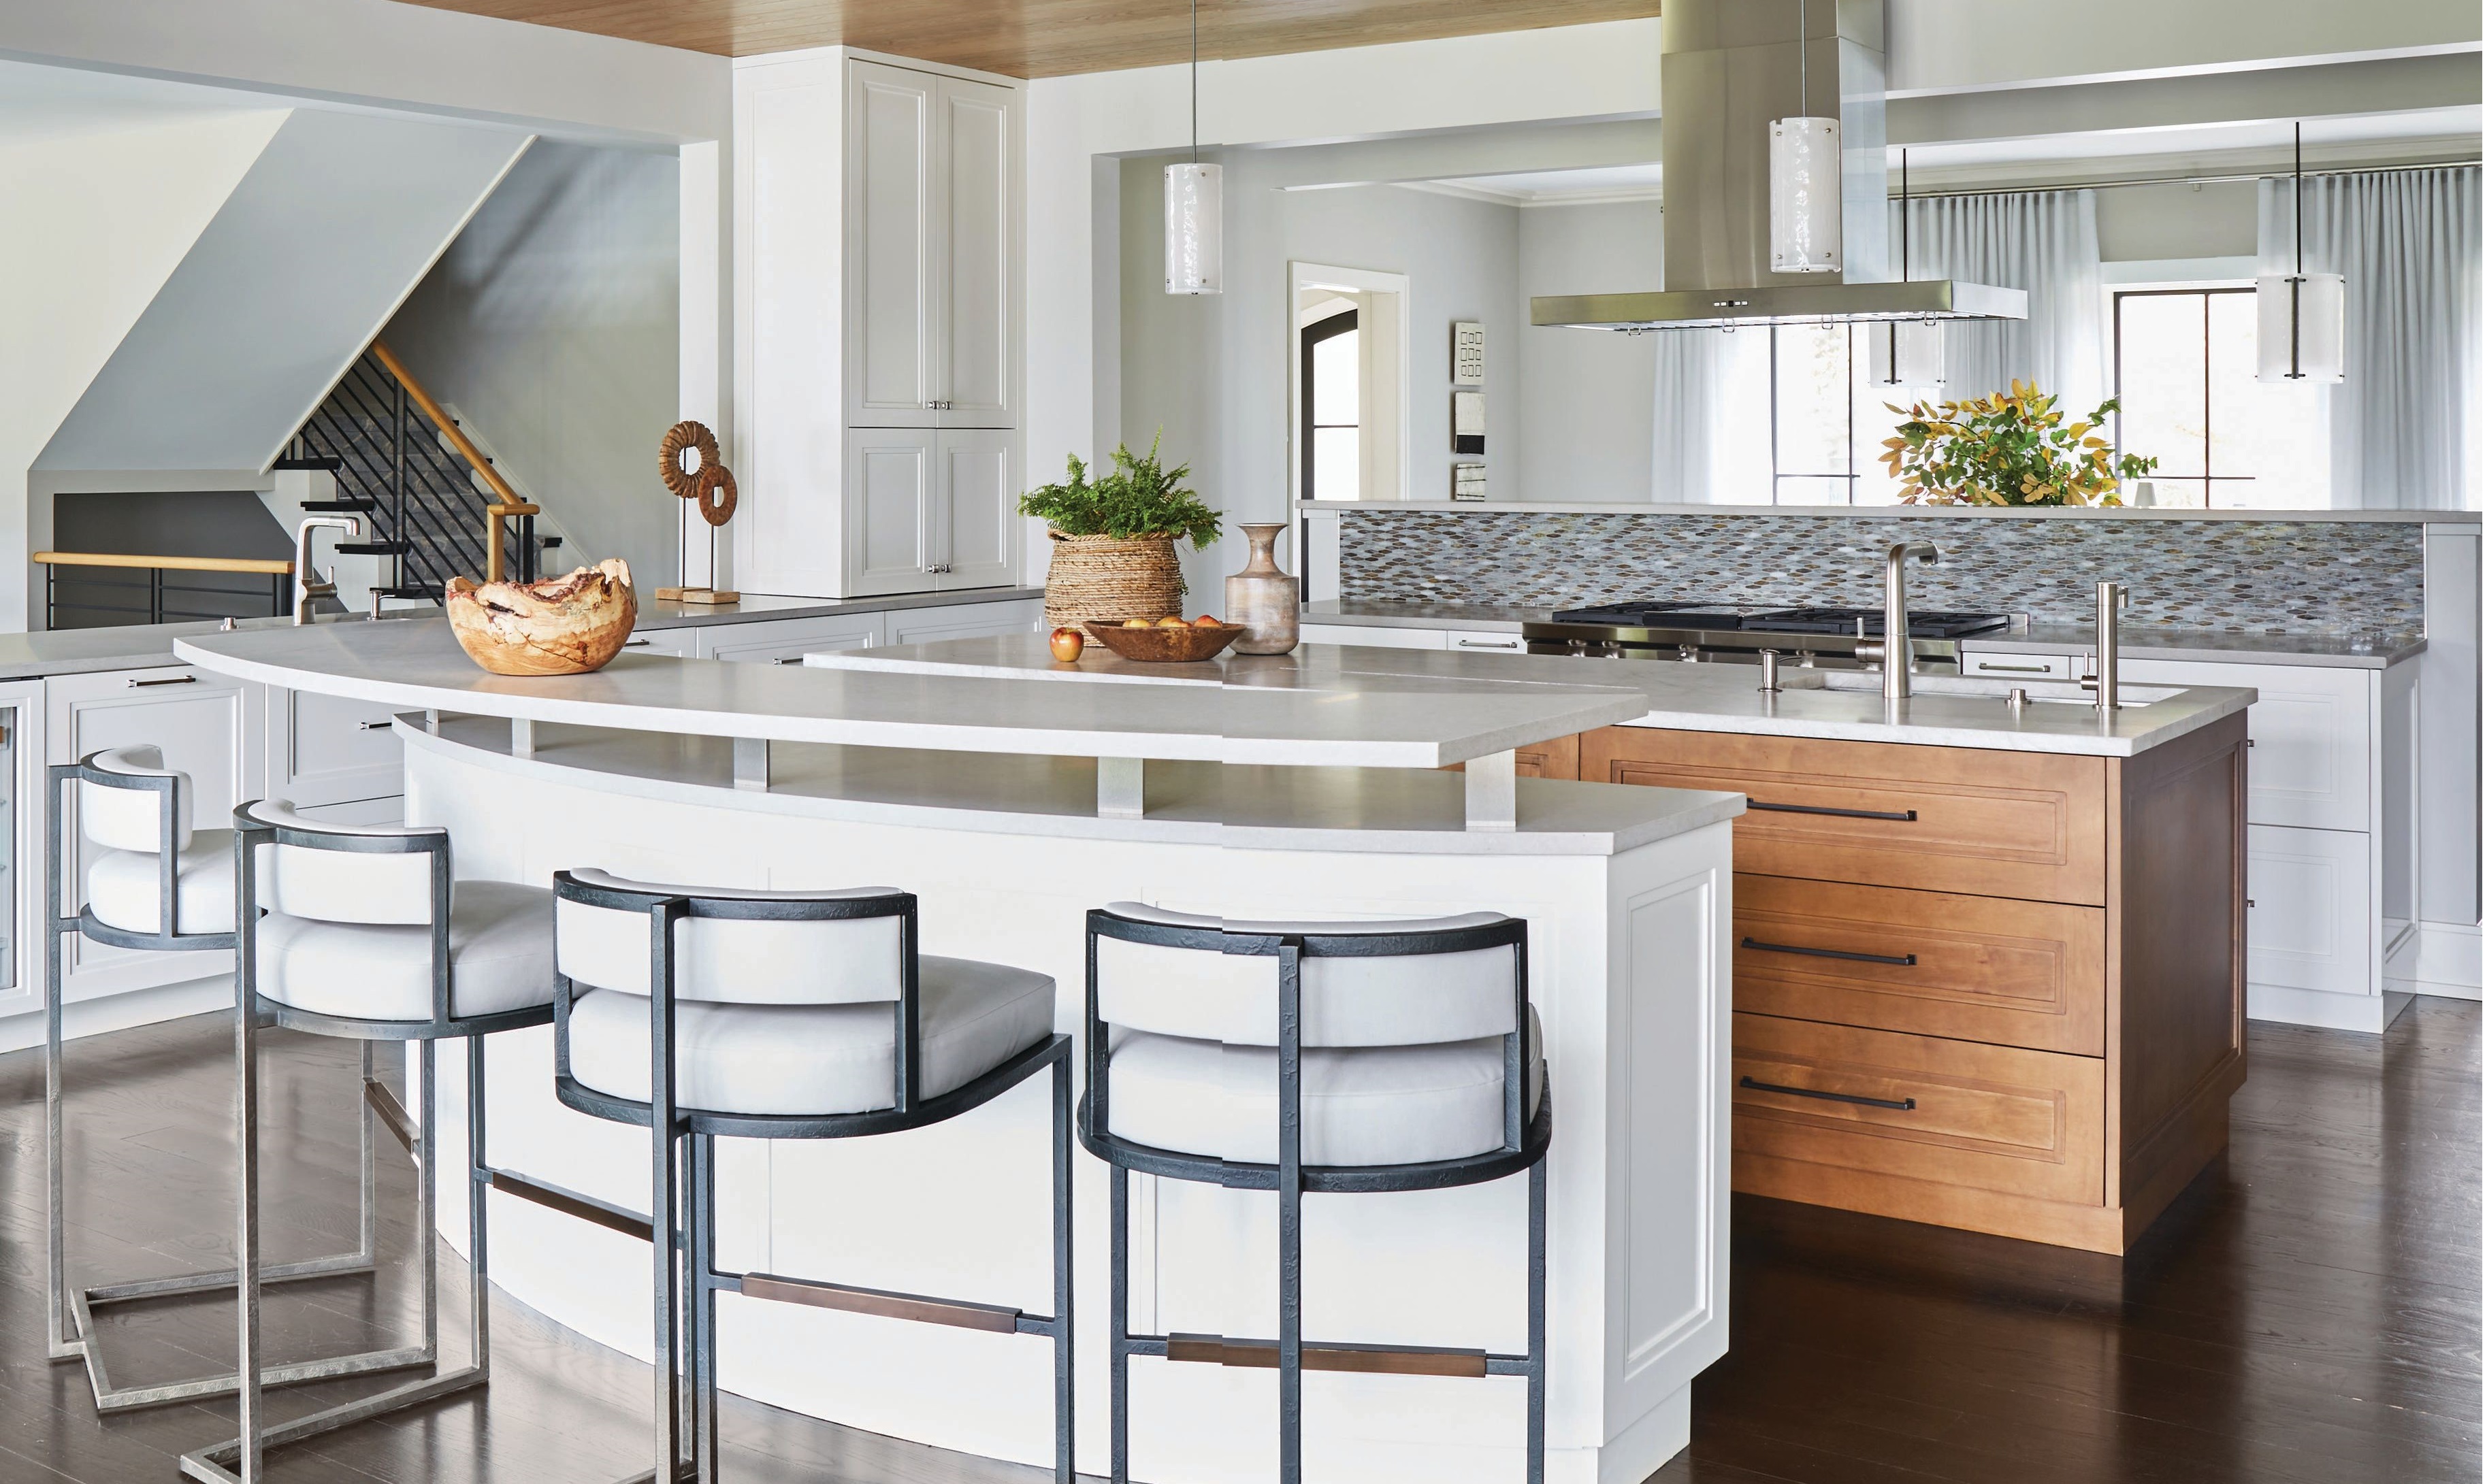 From chic stools by Baker Furniture to Sub-Zero and Wolf appliances and cabinetry by Arbor Mills, the kitchen is a light, airy dream space. Photographed by MICHAEL ALAN KASKEL